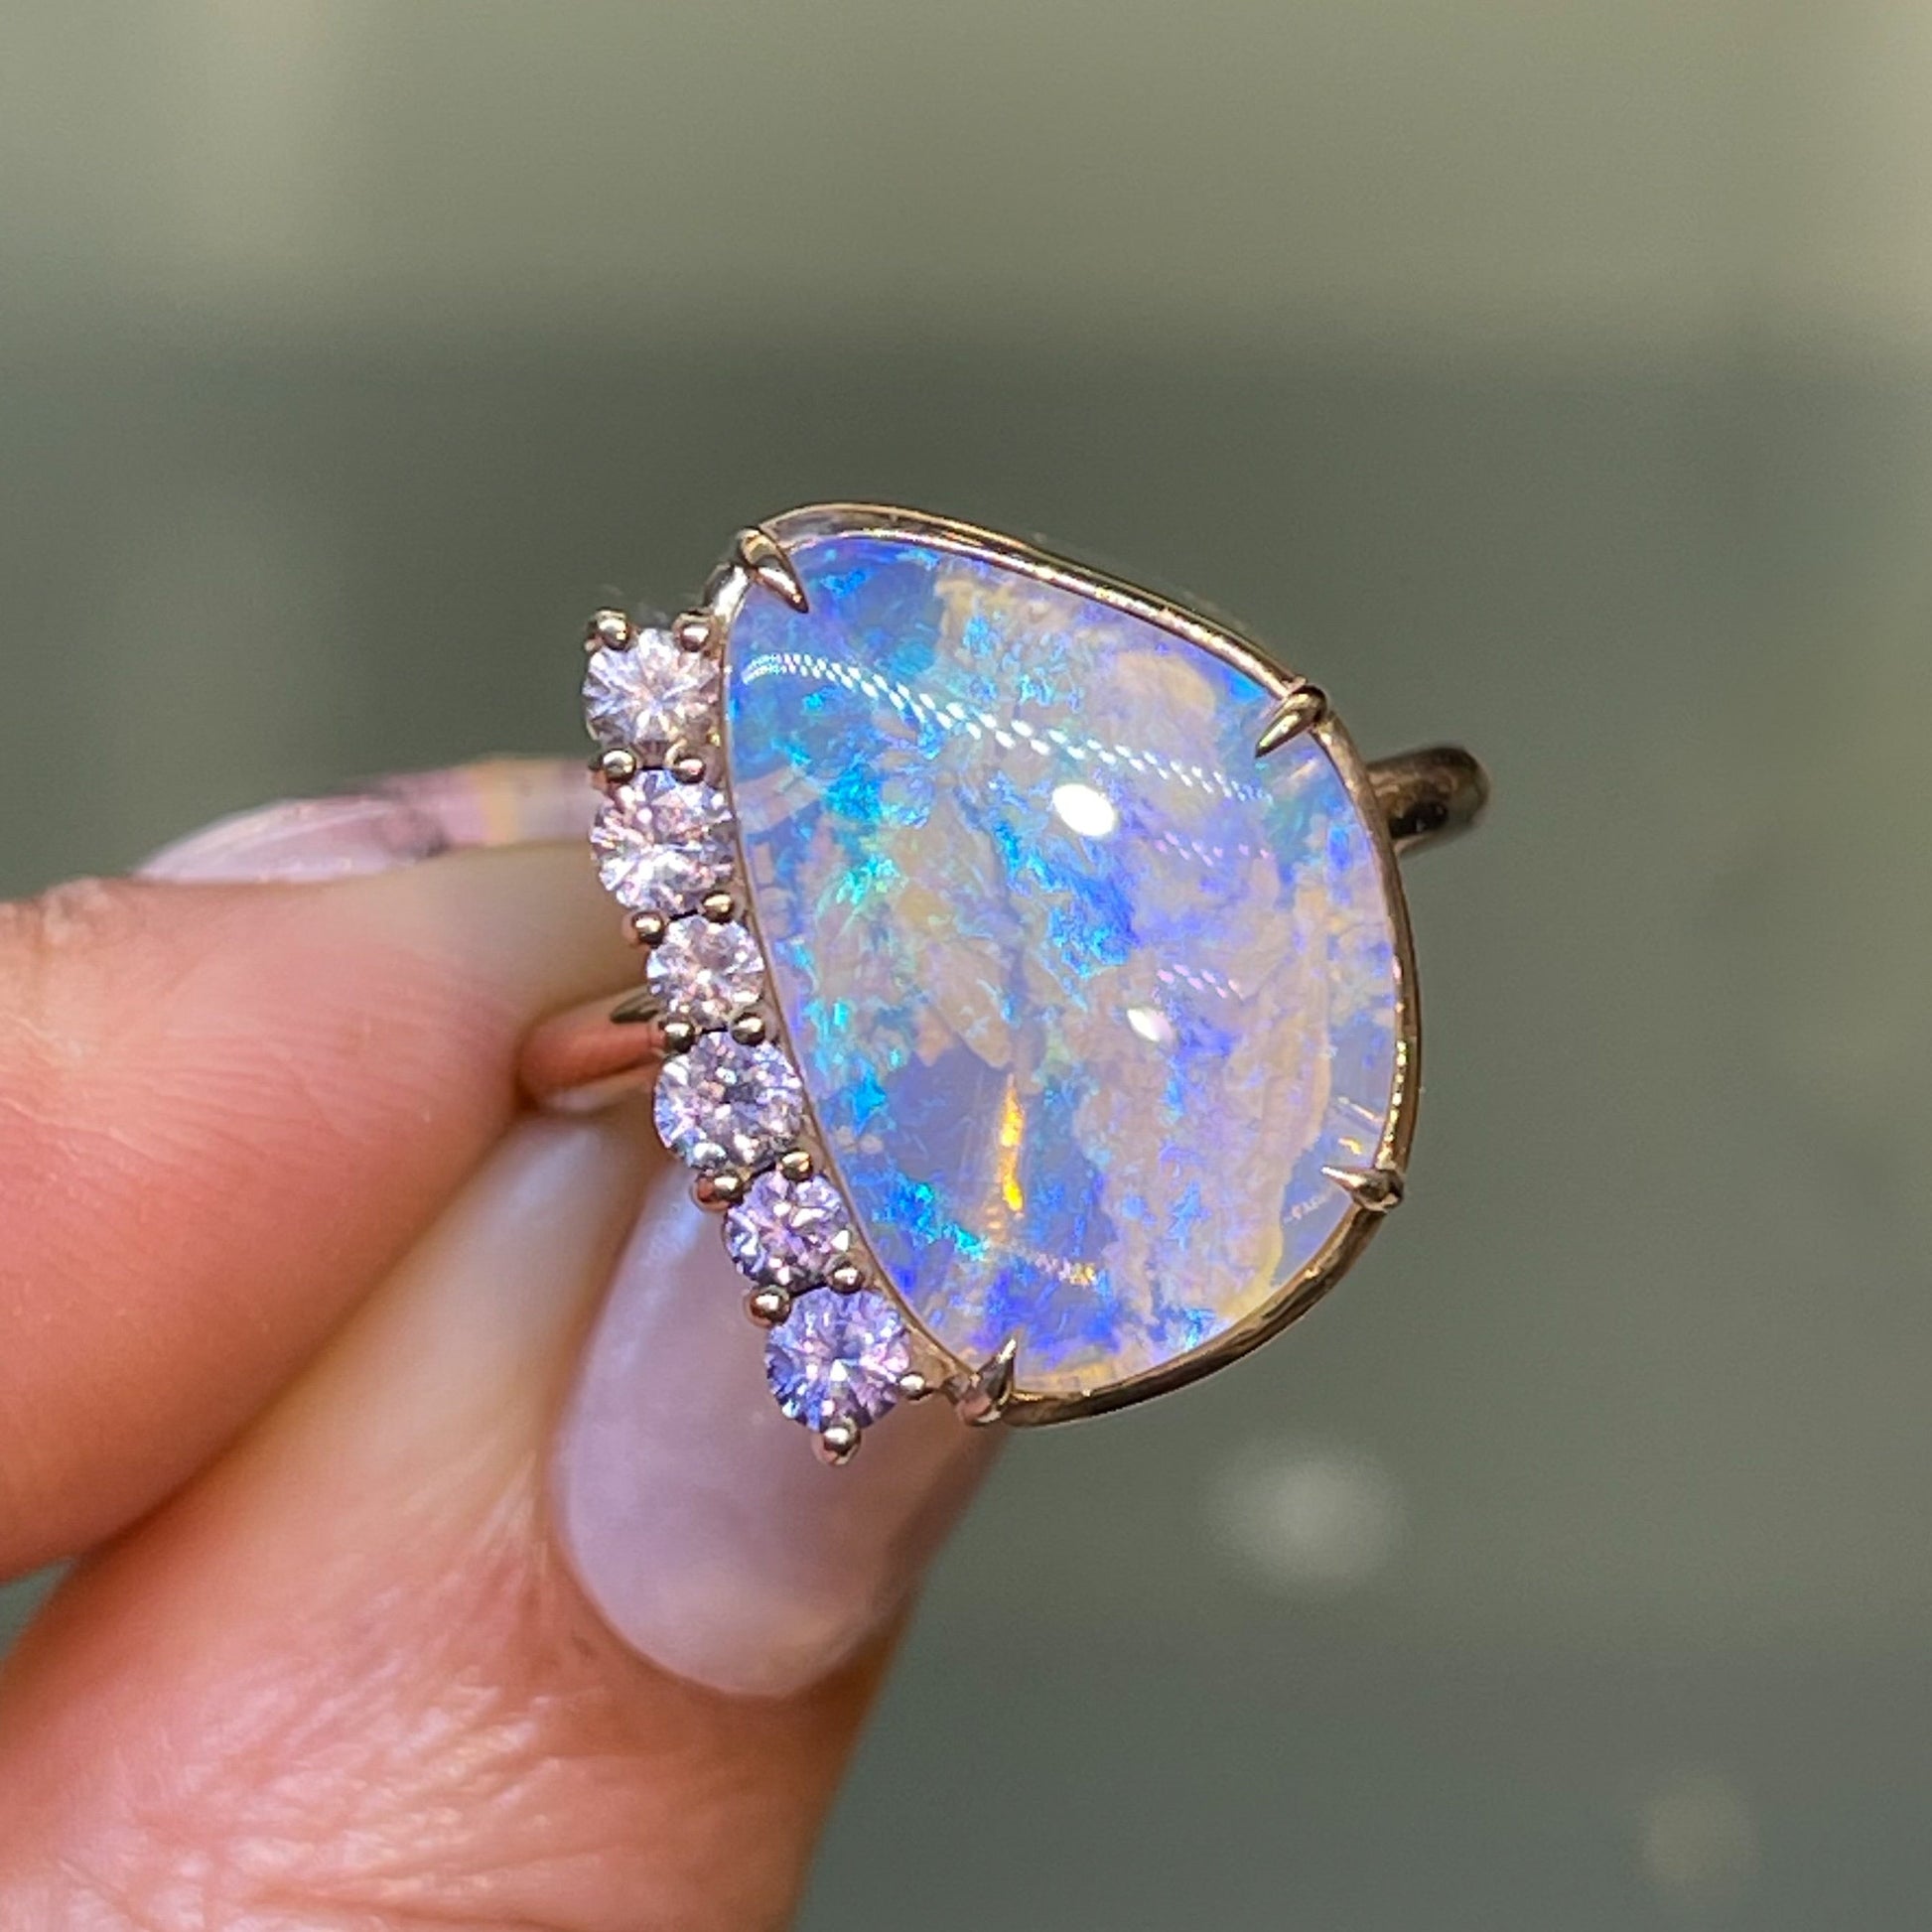 An Australian Opal Ring by NIXIN Jewelry held up under indoor lighting. The opal and sapphire ring is set in 14k rose gold.